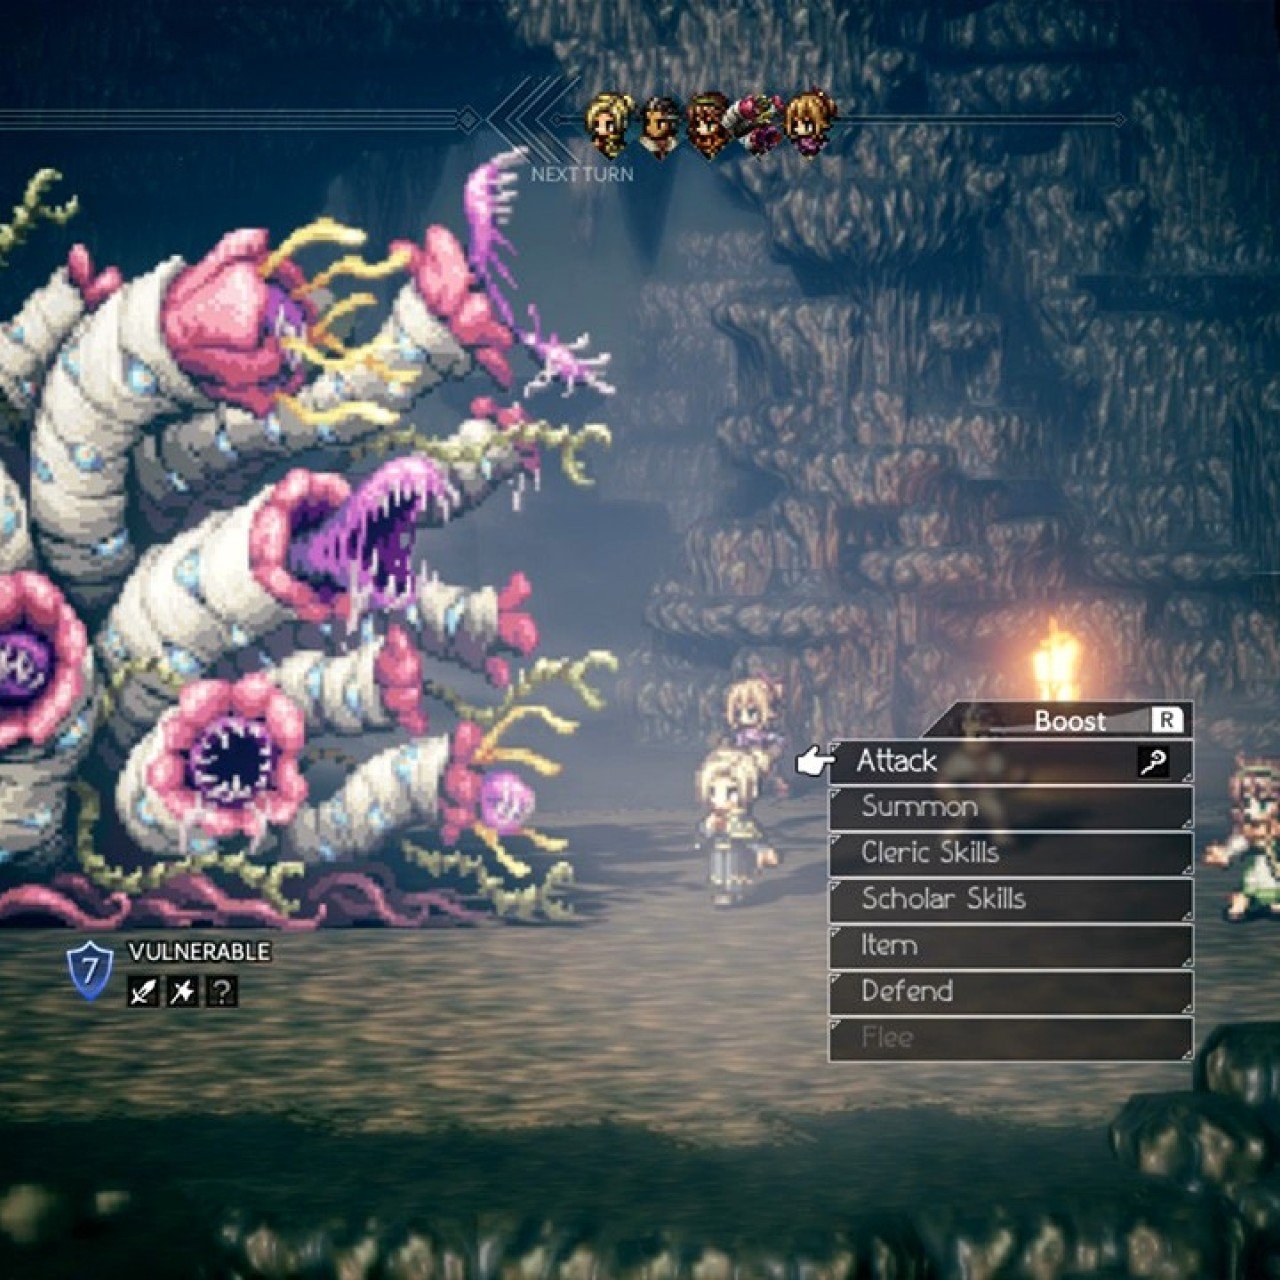 Octopath Traveler review: the Nintendo Switch gets a JRPG for